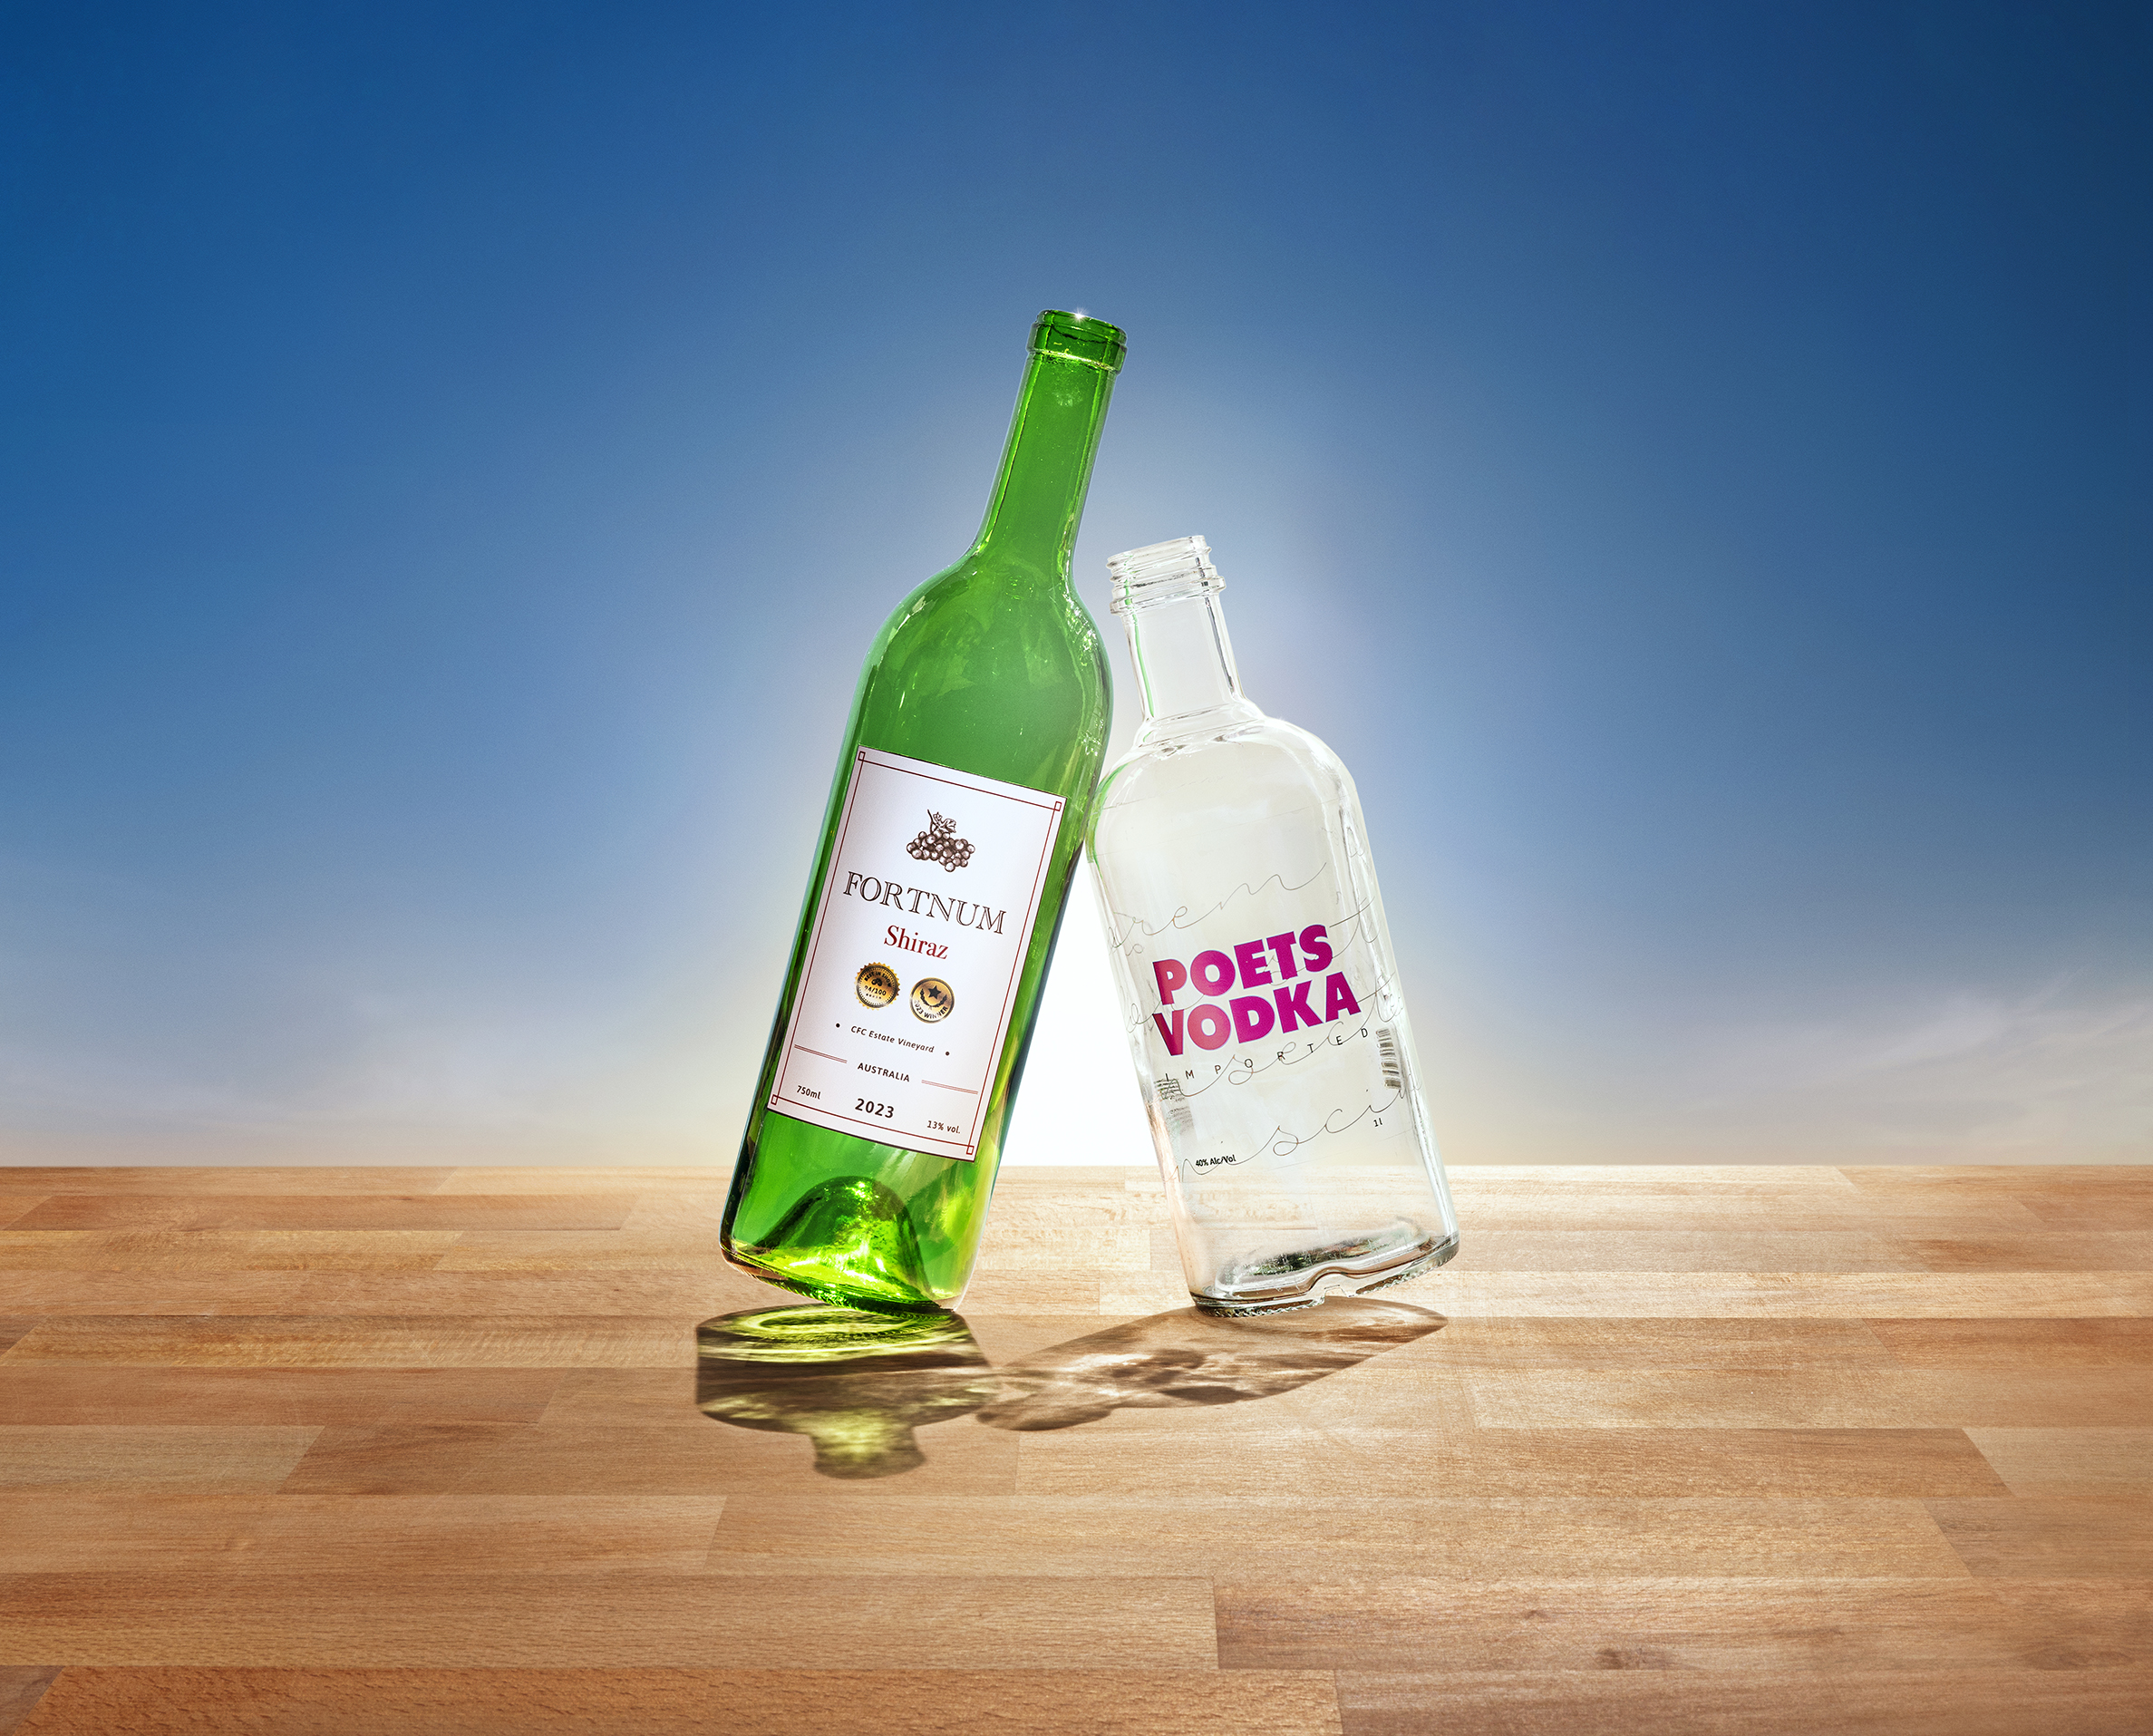 Wine and spirit bottles join the range of Containers for Change